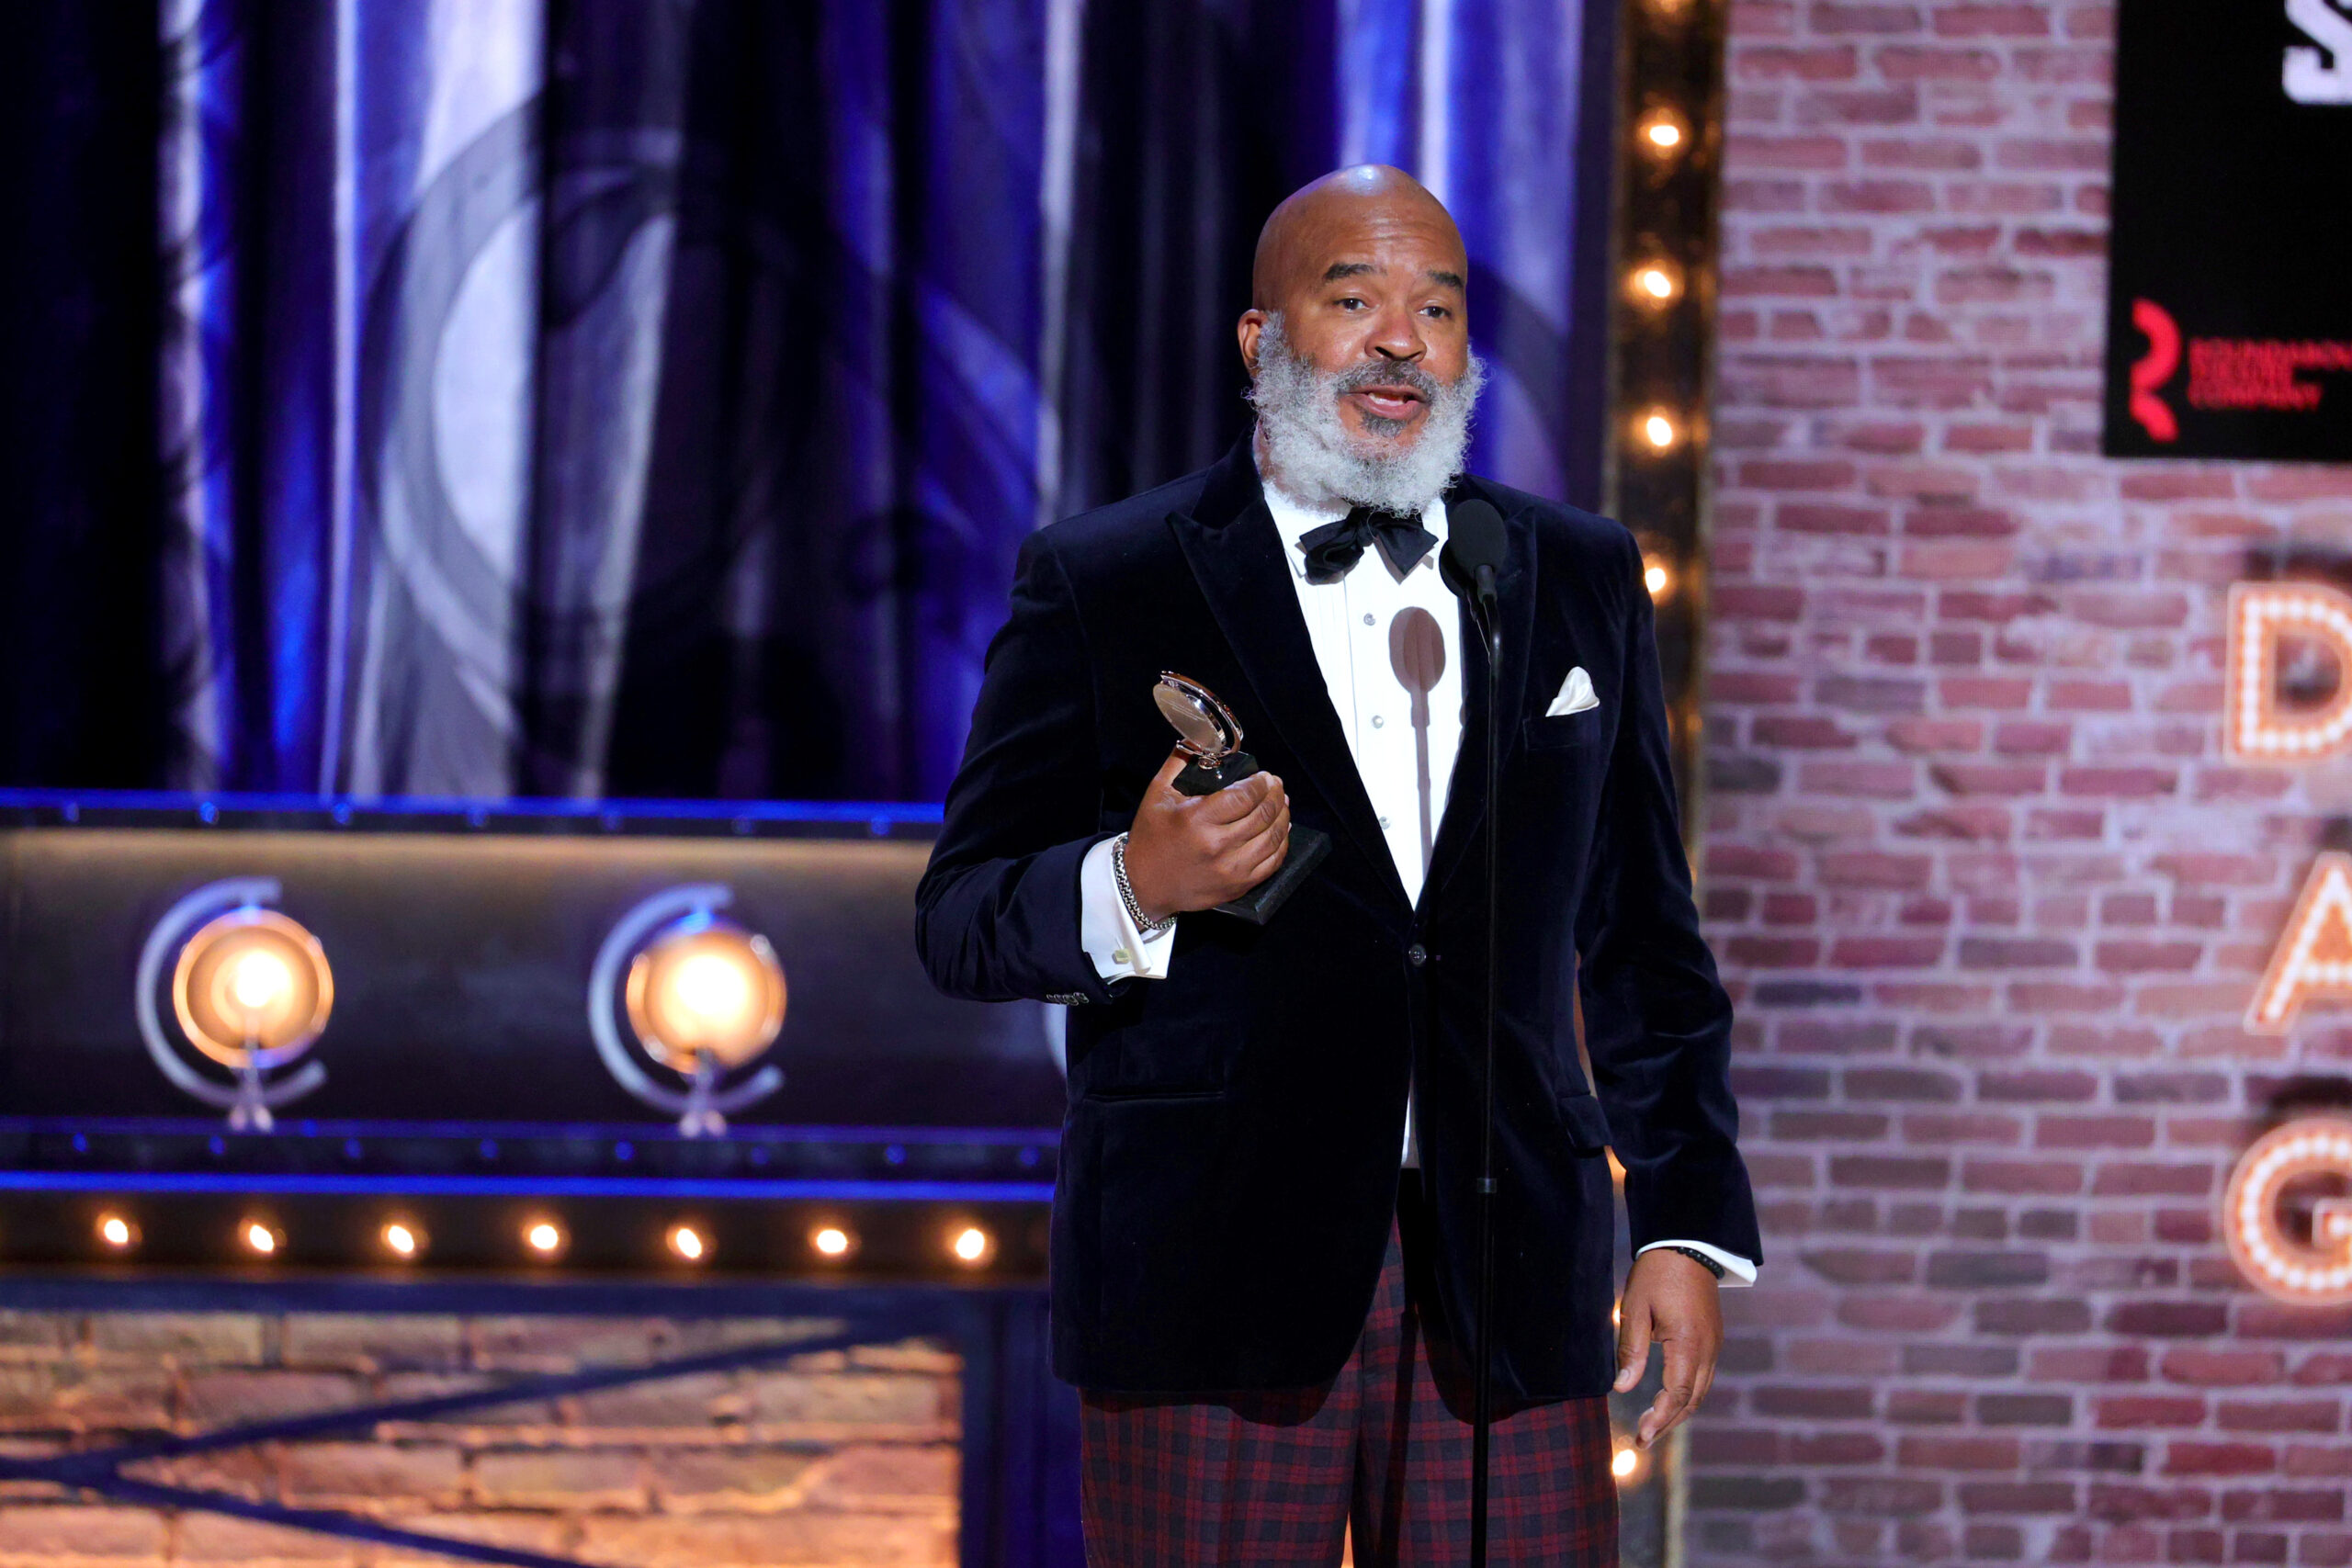 NEW YORK, NEW YORK - SEPTEMBER 26: David Alan Grier accepts the award for Best Performance by an Actor in a Featured Role in a Play for "A Soldier's Play" during the 74th Annual Tony Awards at Winter Garden Theatre on September 26, 2021 in New York City. (Photo by Theo Wargo/Getty Images for Tony Awards Productions)